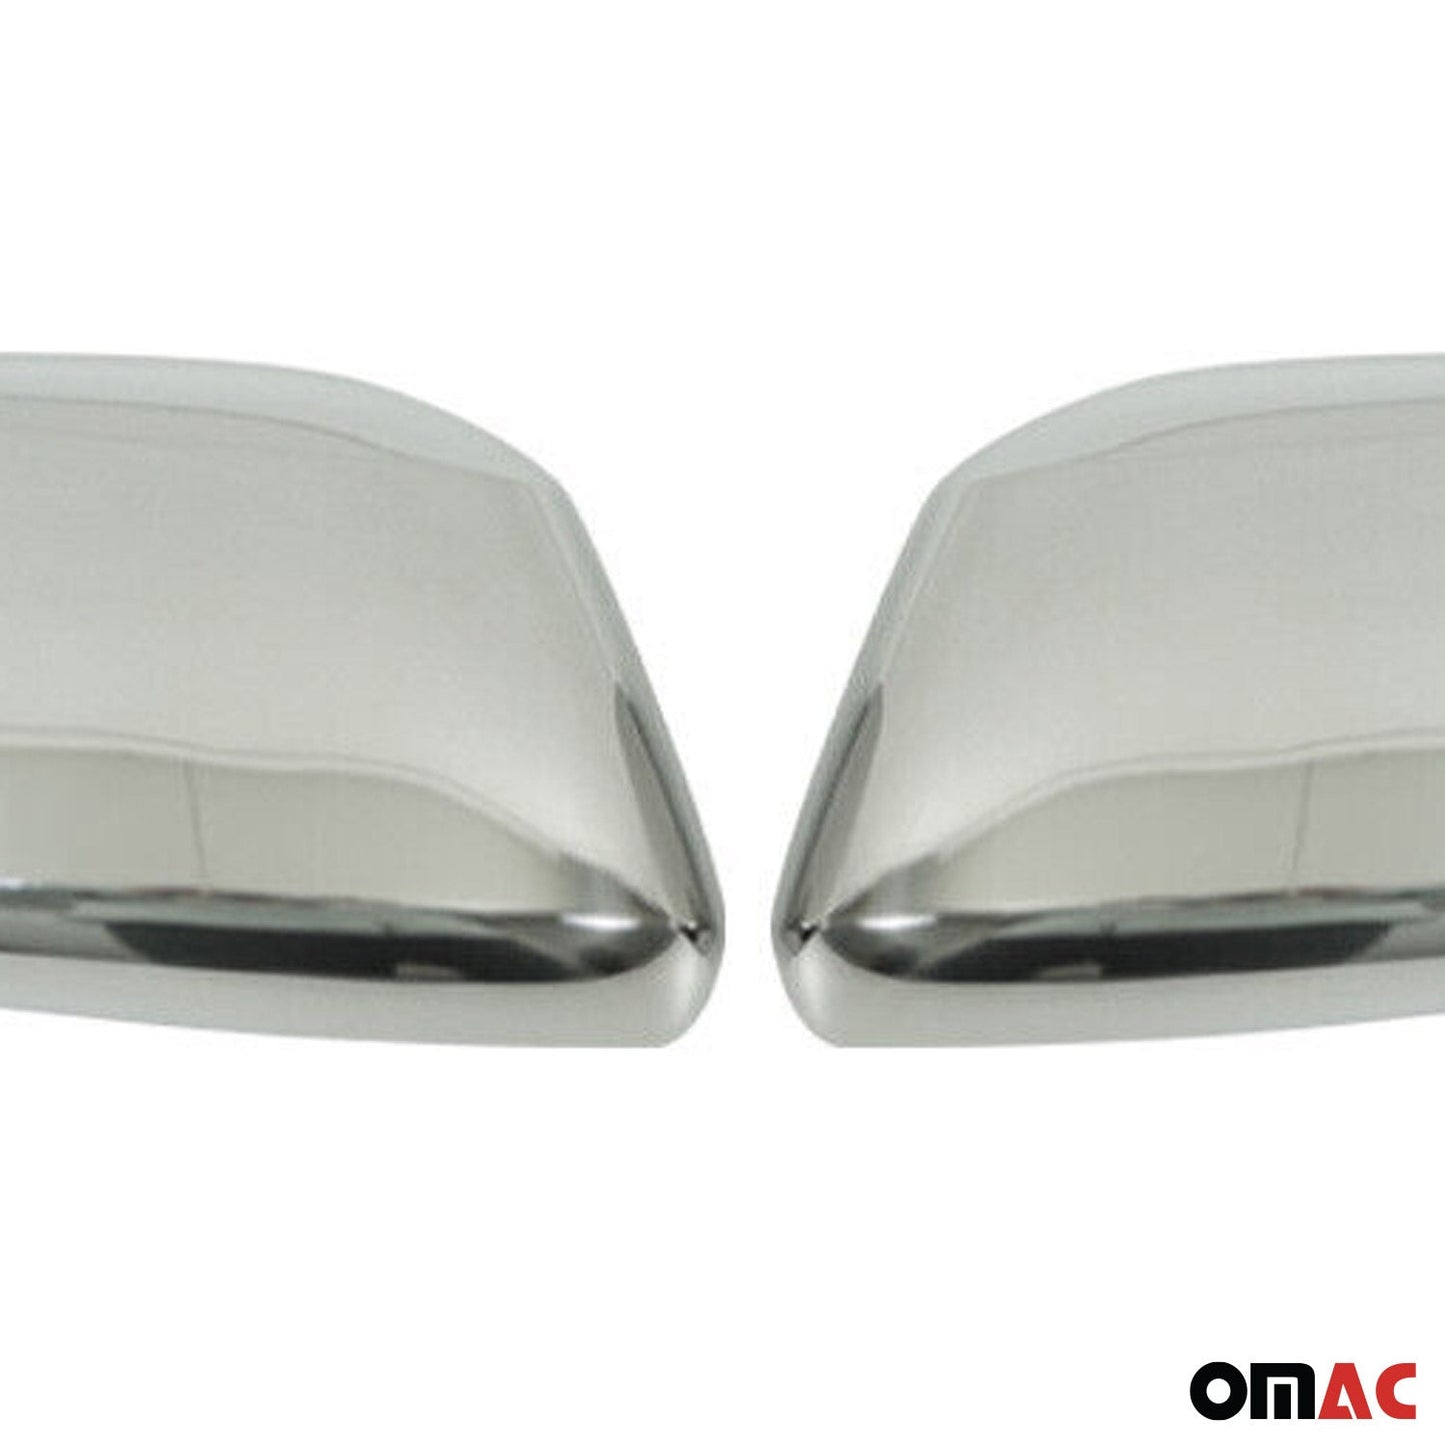 OMAC Side Mirror Cover Caps Fits Nissan Frontier 2005-2021 Steel Silver 2 Pcs 5003111